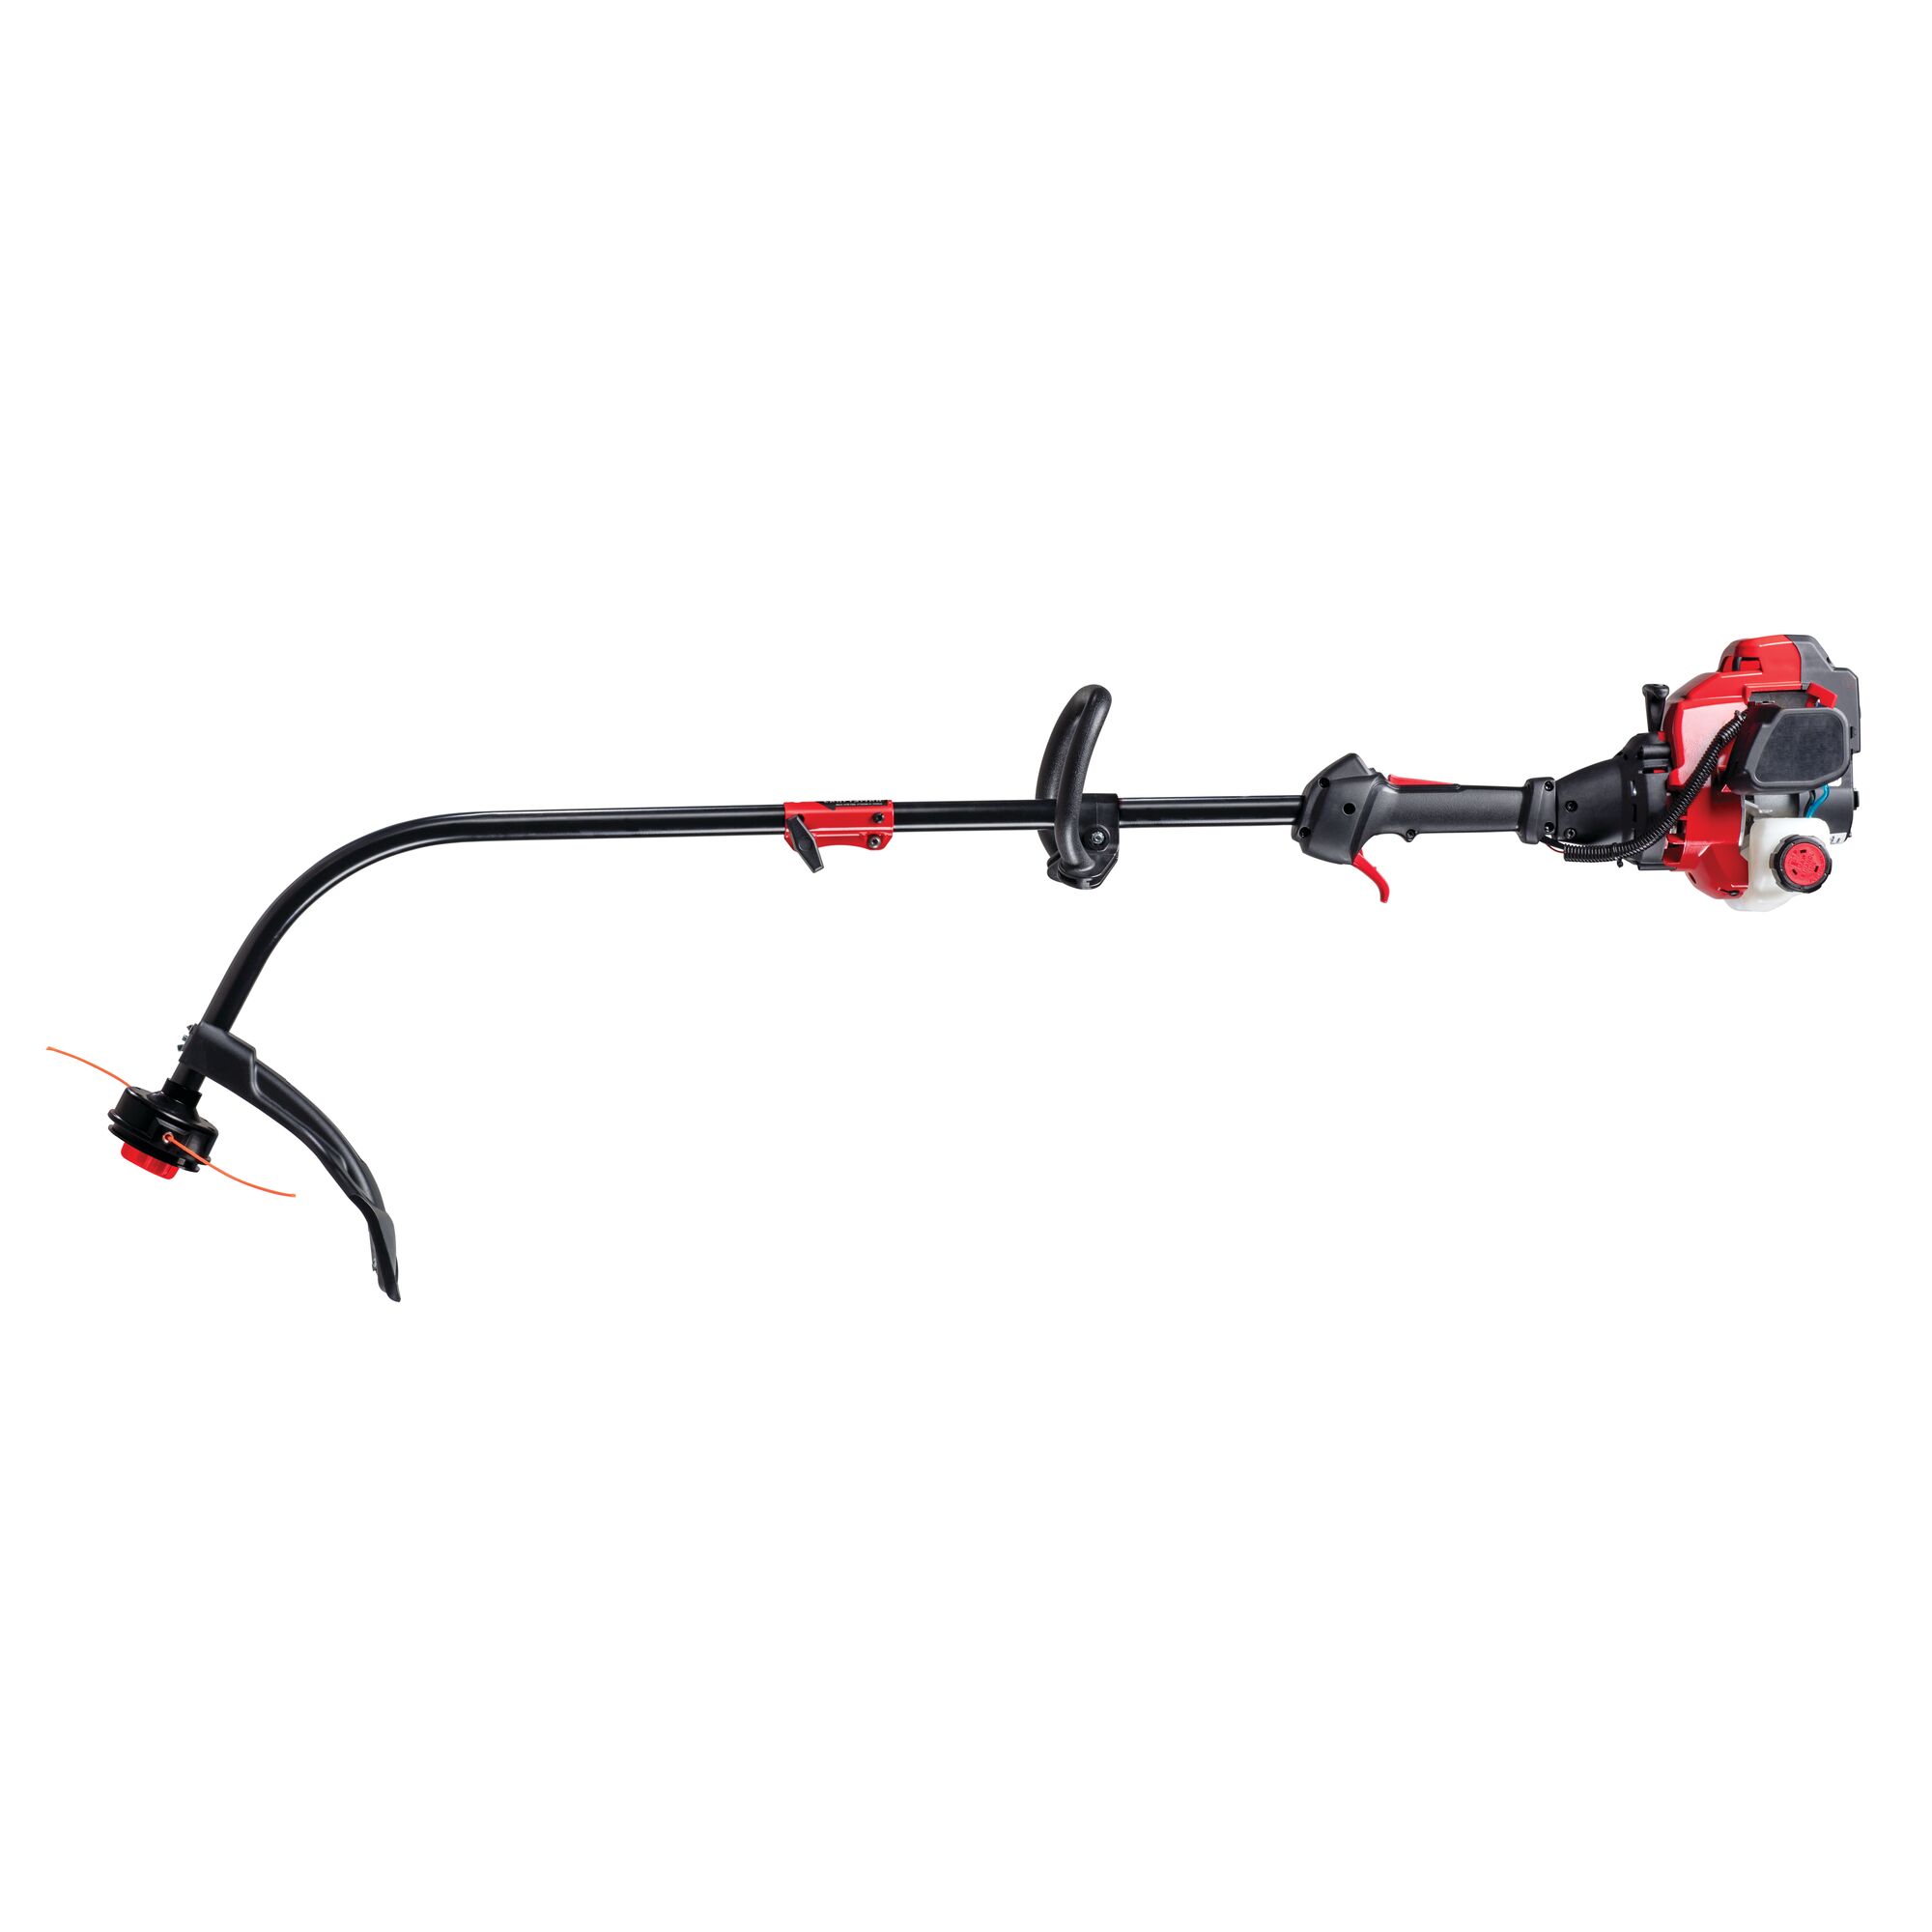 Profile of 2 Cycle 17 inch attachment capable curved shaft gas weedwacker trimmer.